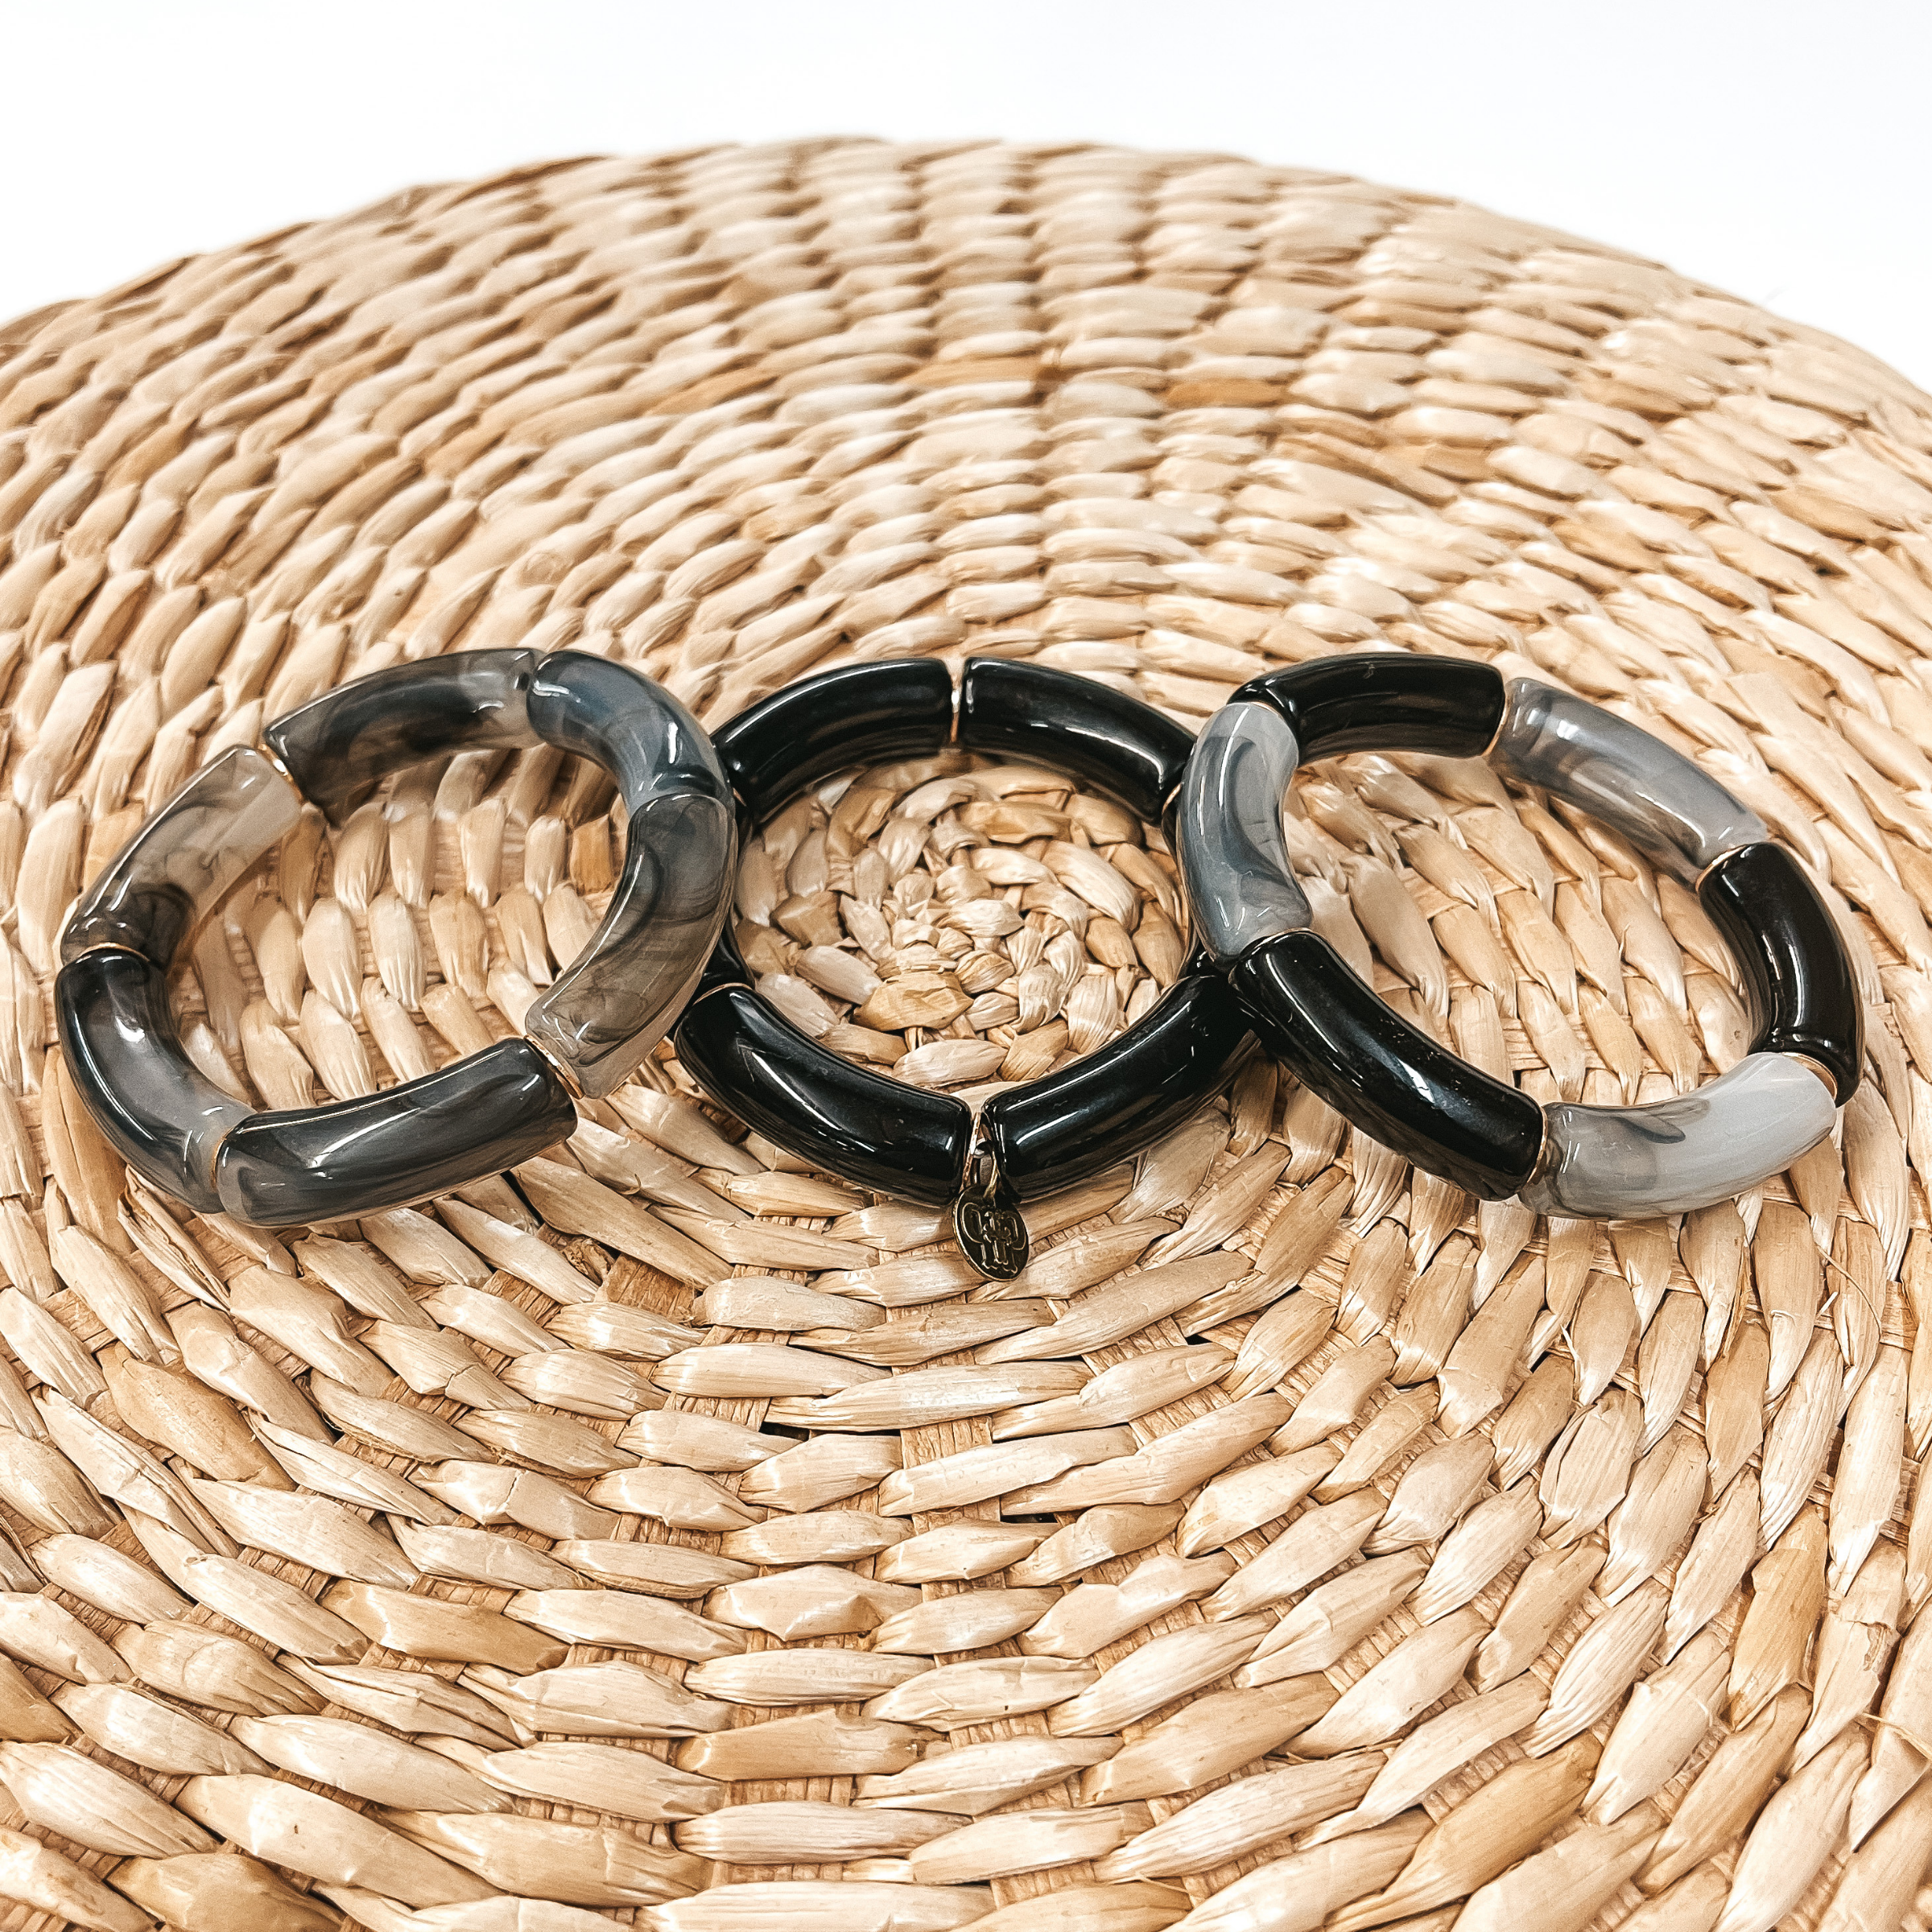 These are three acrylic tube bracelets in black  with different acrylic patterns and gold spacers.  The bracelet in the  left is a clear grey and black marble tubes. The middle one is all solid black.  The right one has a mix of solid black and marble  tubes. Taken on top of a bamboo stool and white background.